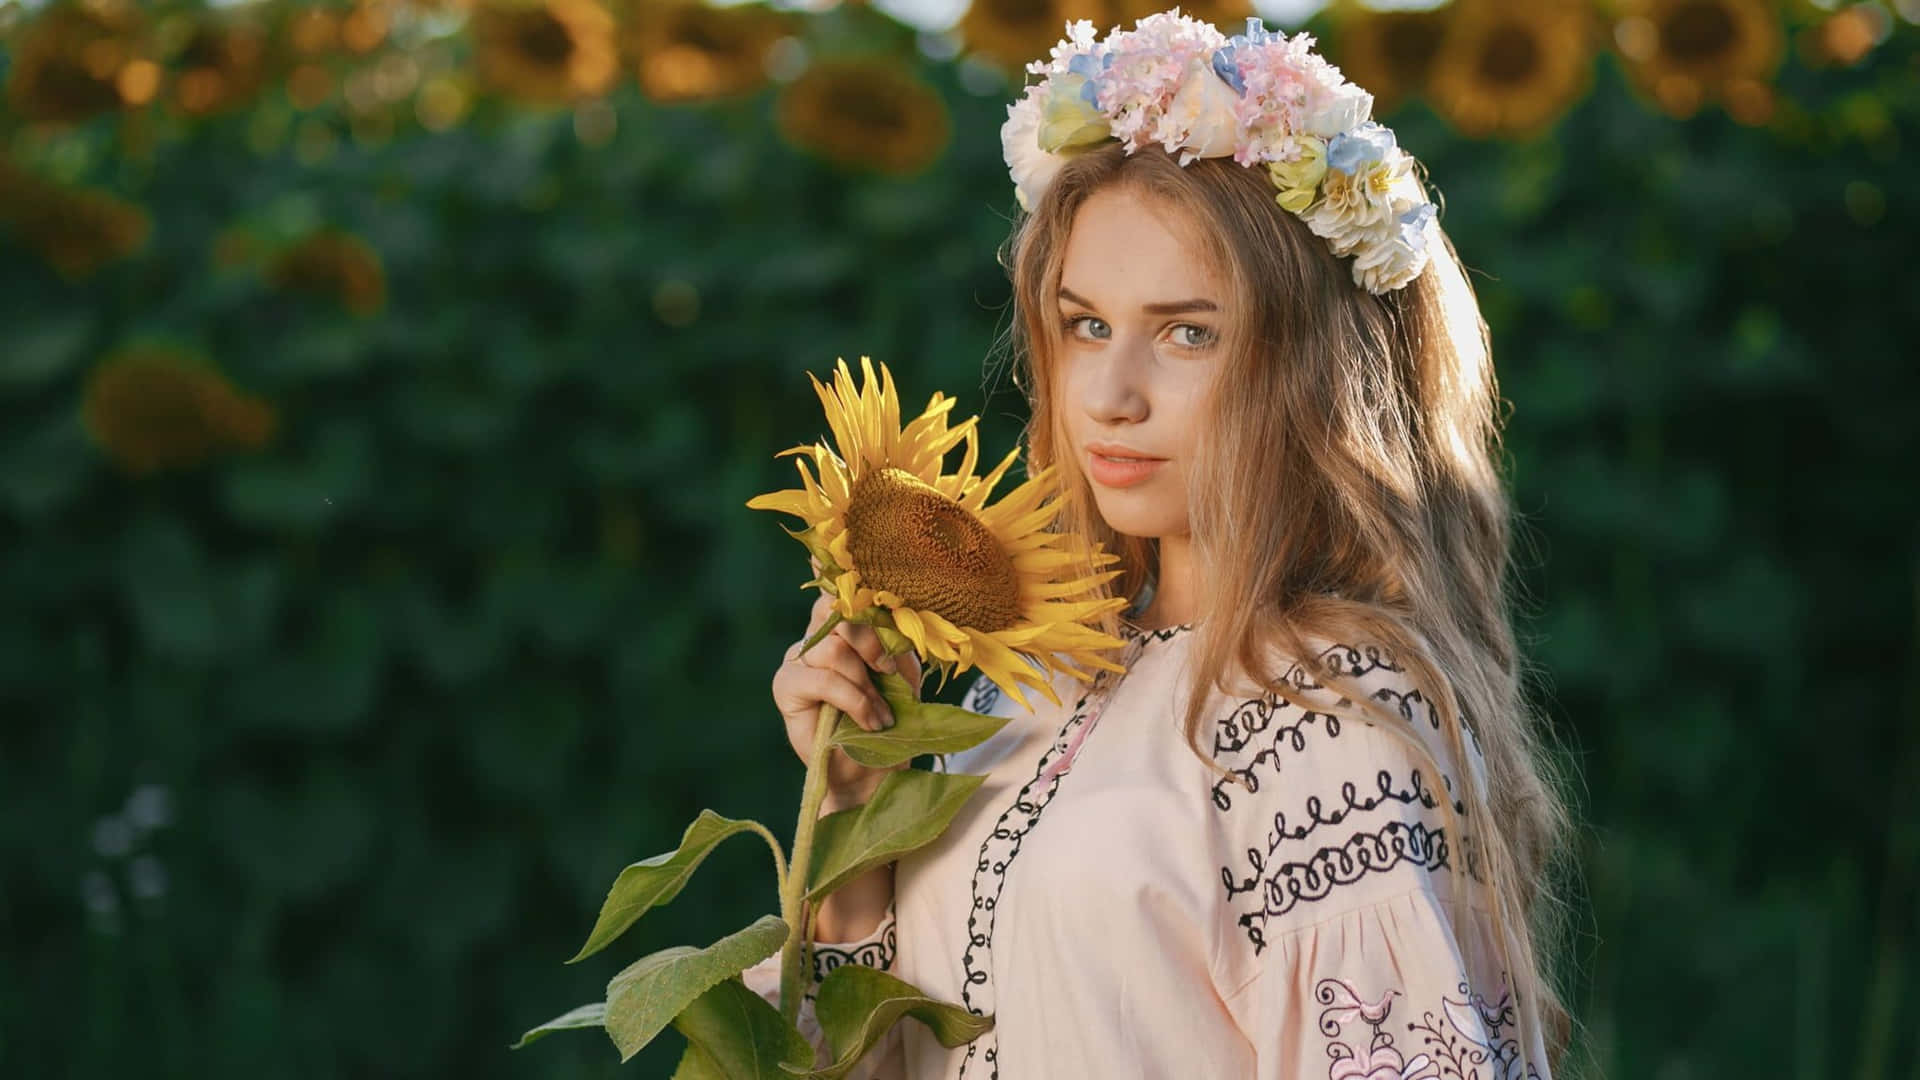 A Girl In A Flower Crown Holding A Sunflower